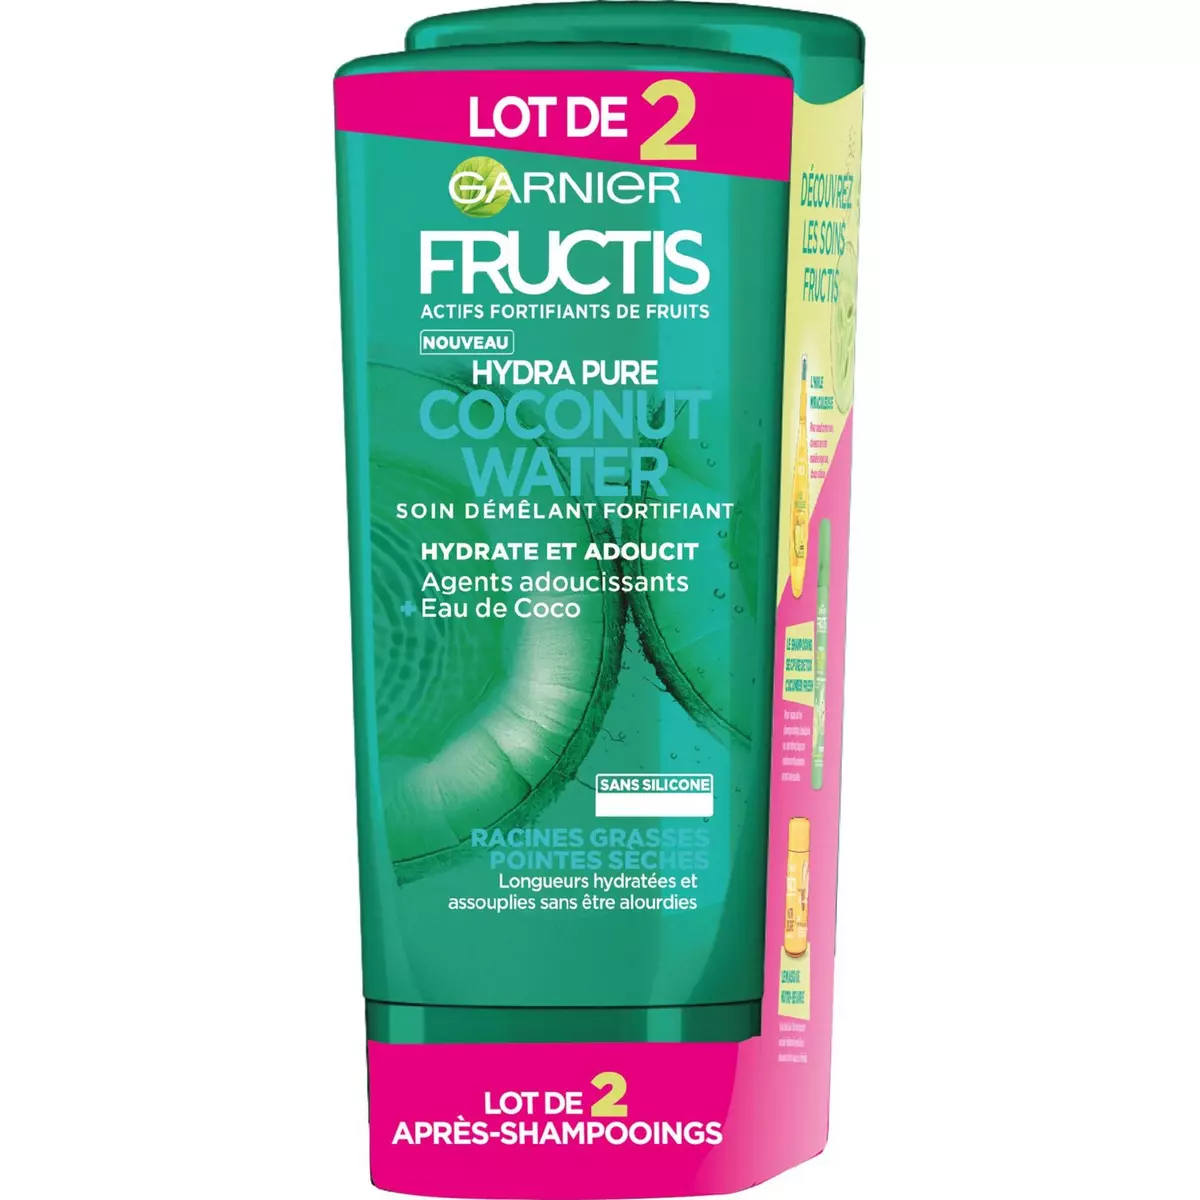 FRUCTIS Coconut Water soin démêlant fortifiant racines grasses pointes sèches 2x200ml